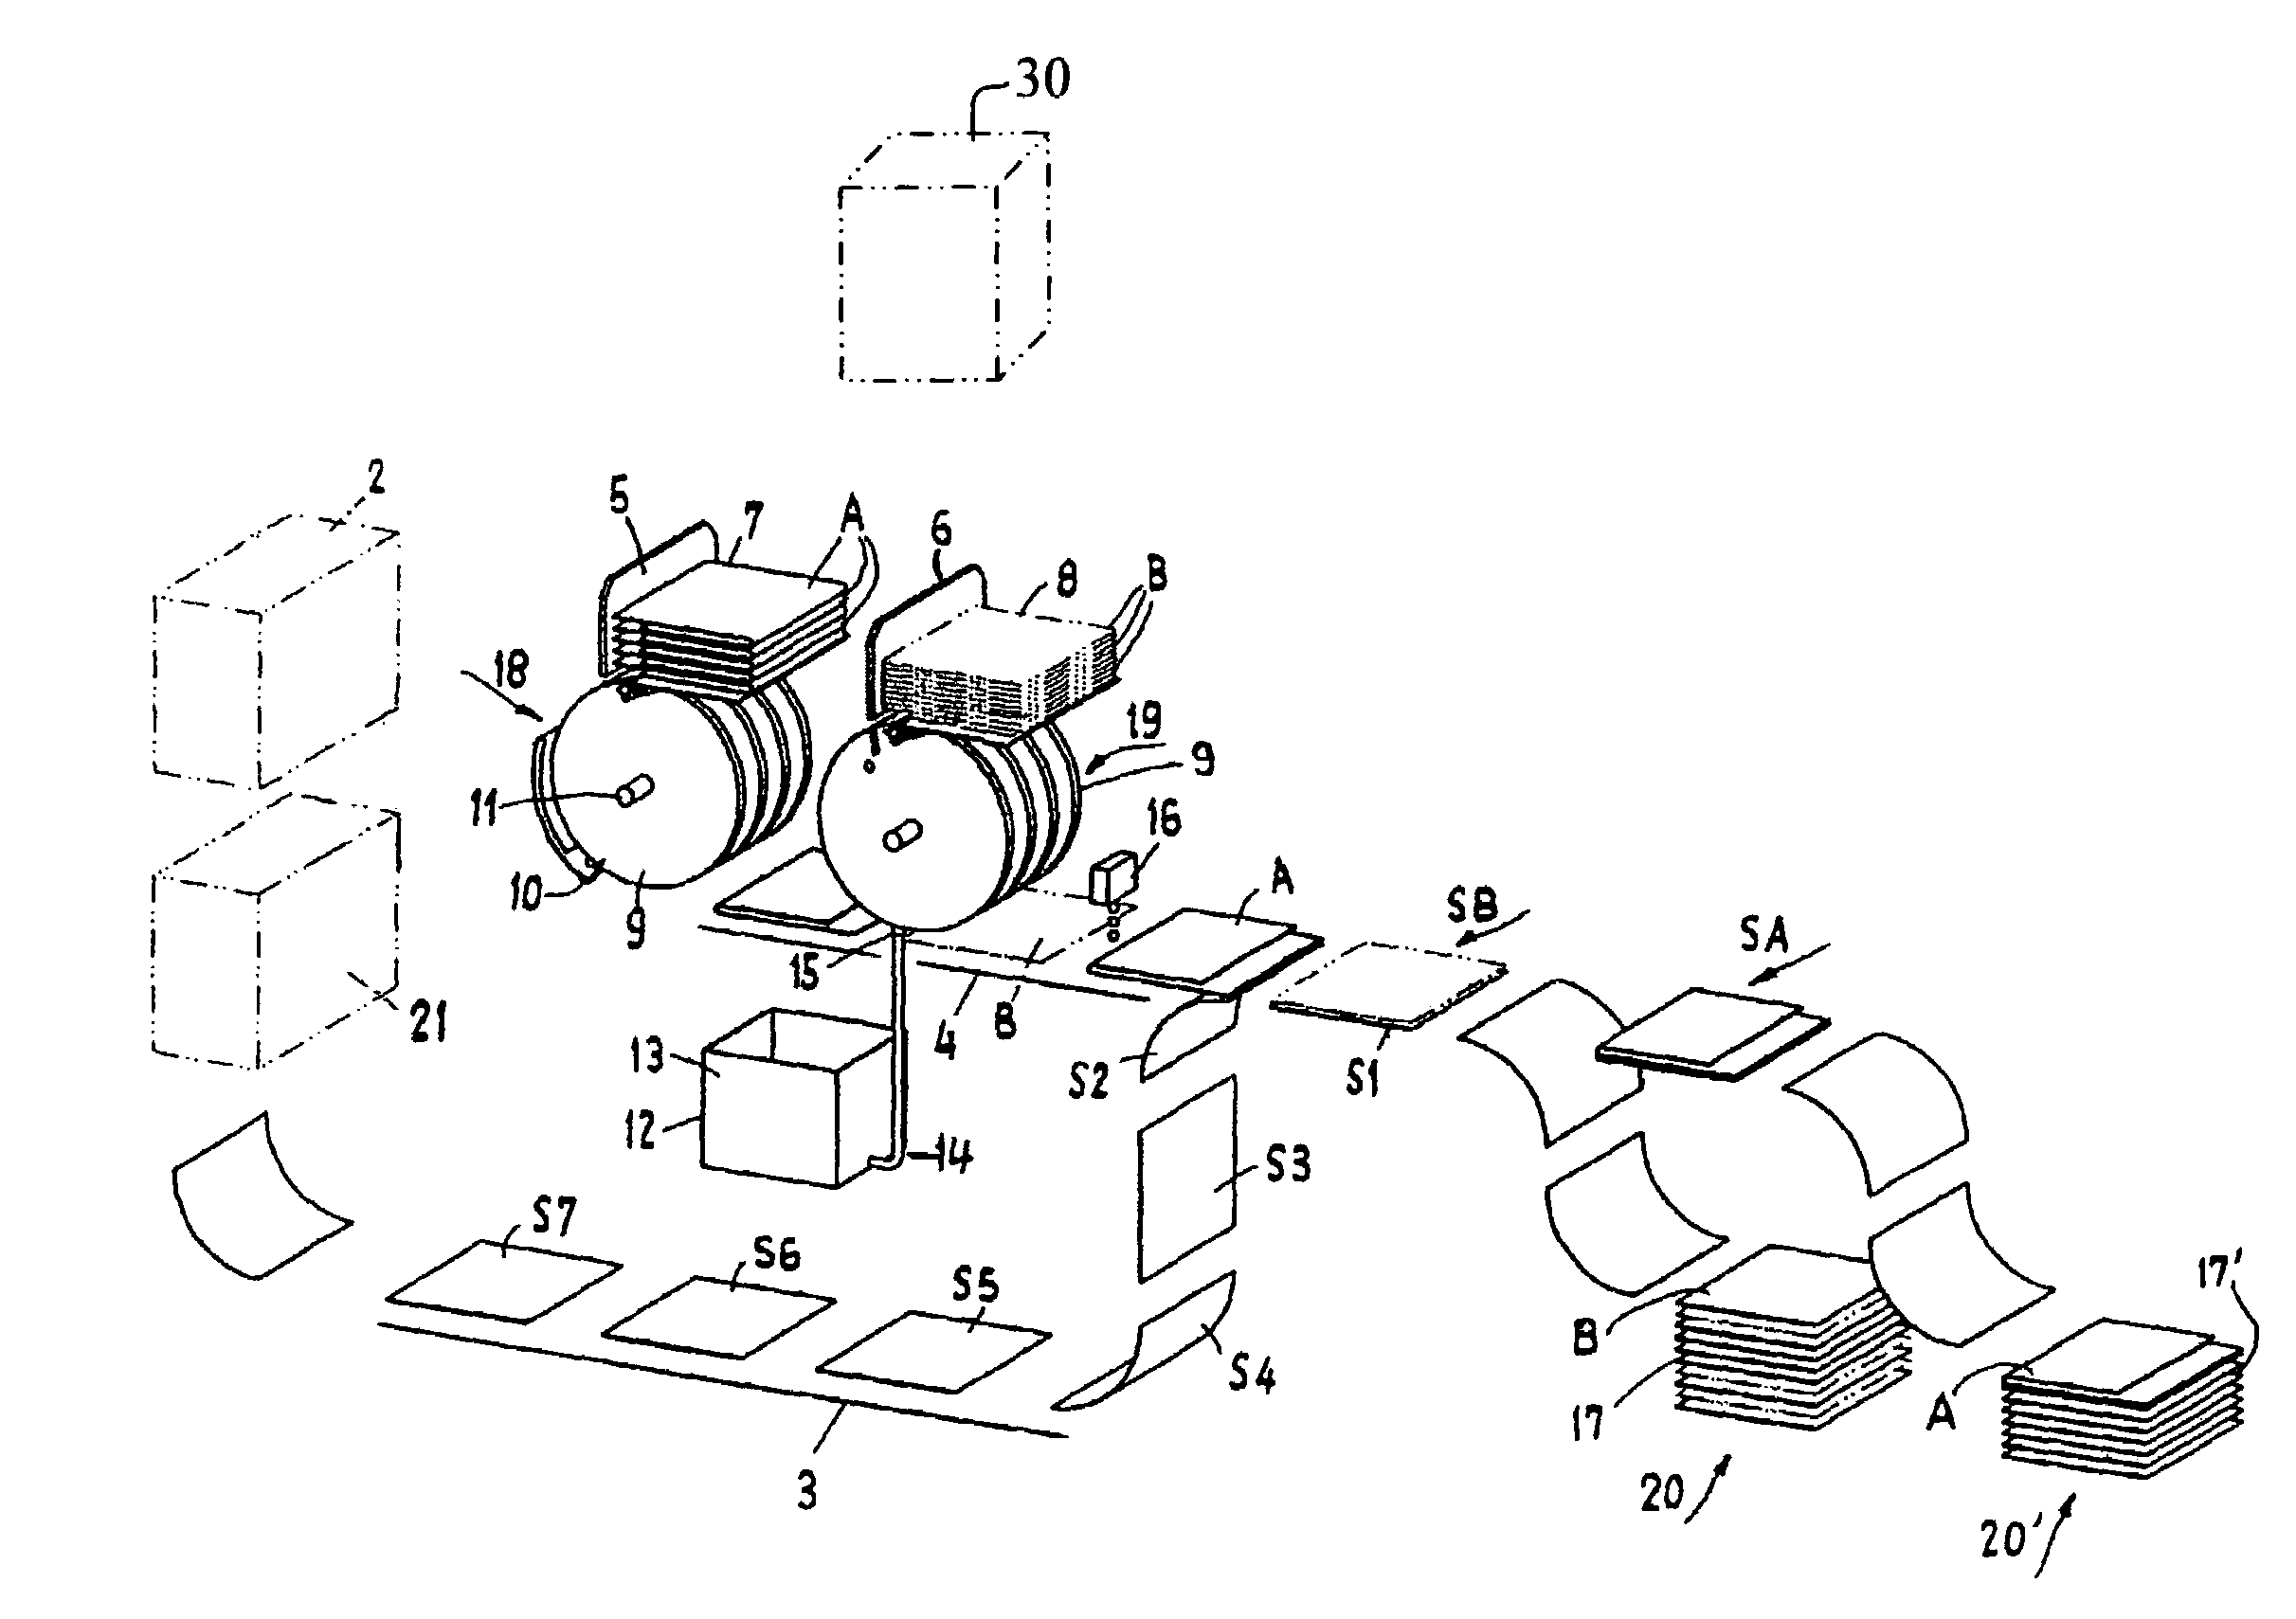 Method for manufacturing printed products such as books, brochures, magazines or the like